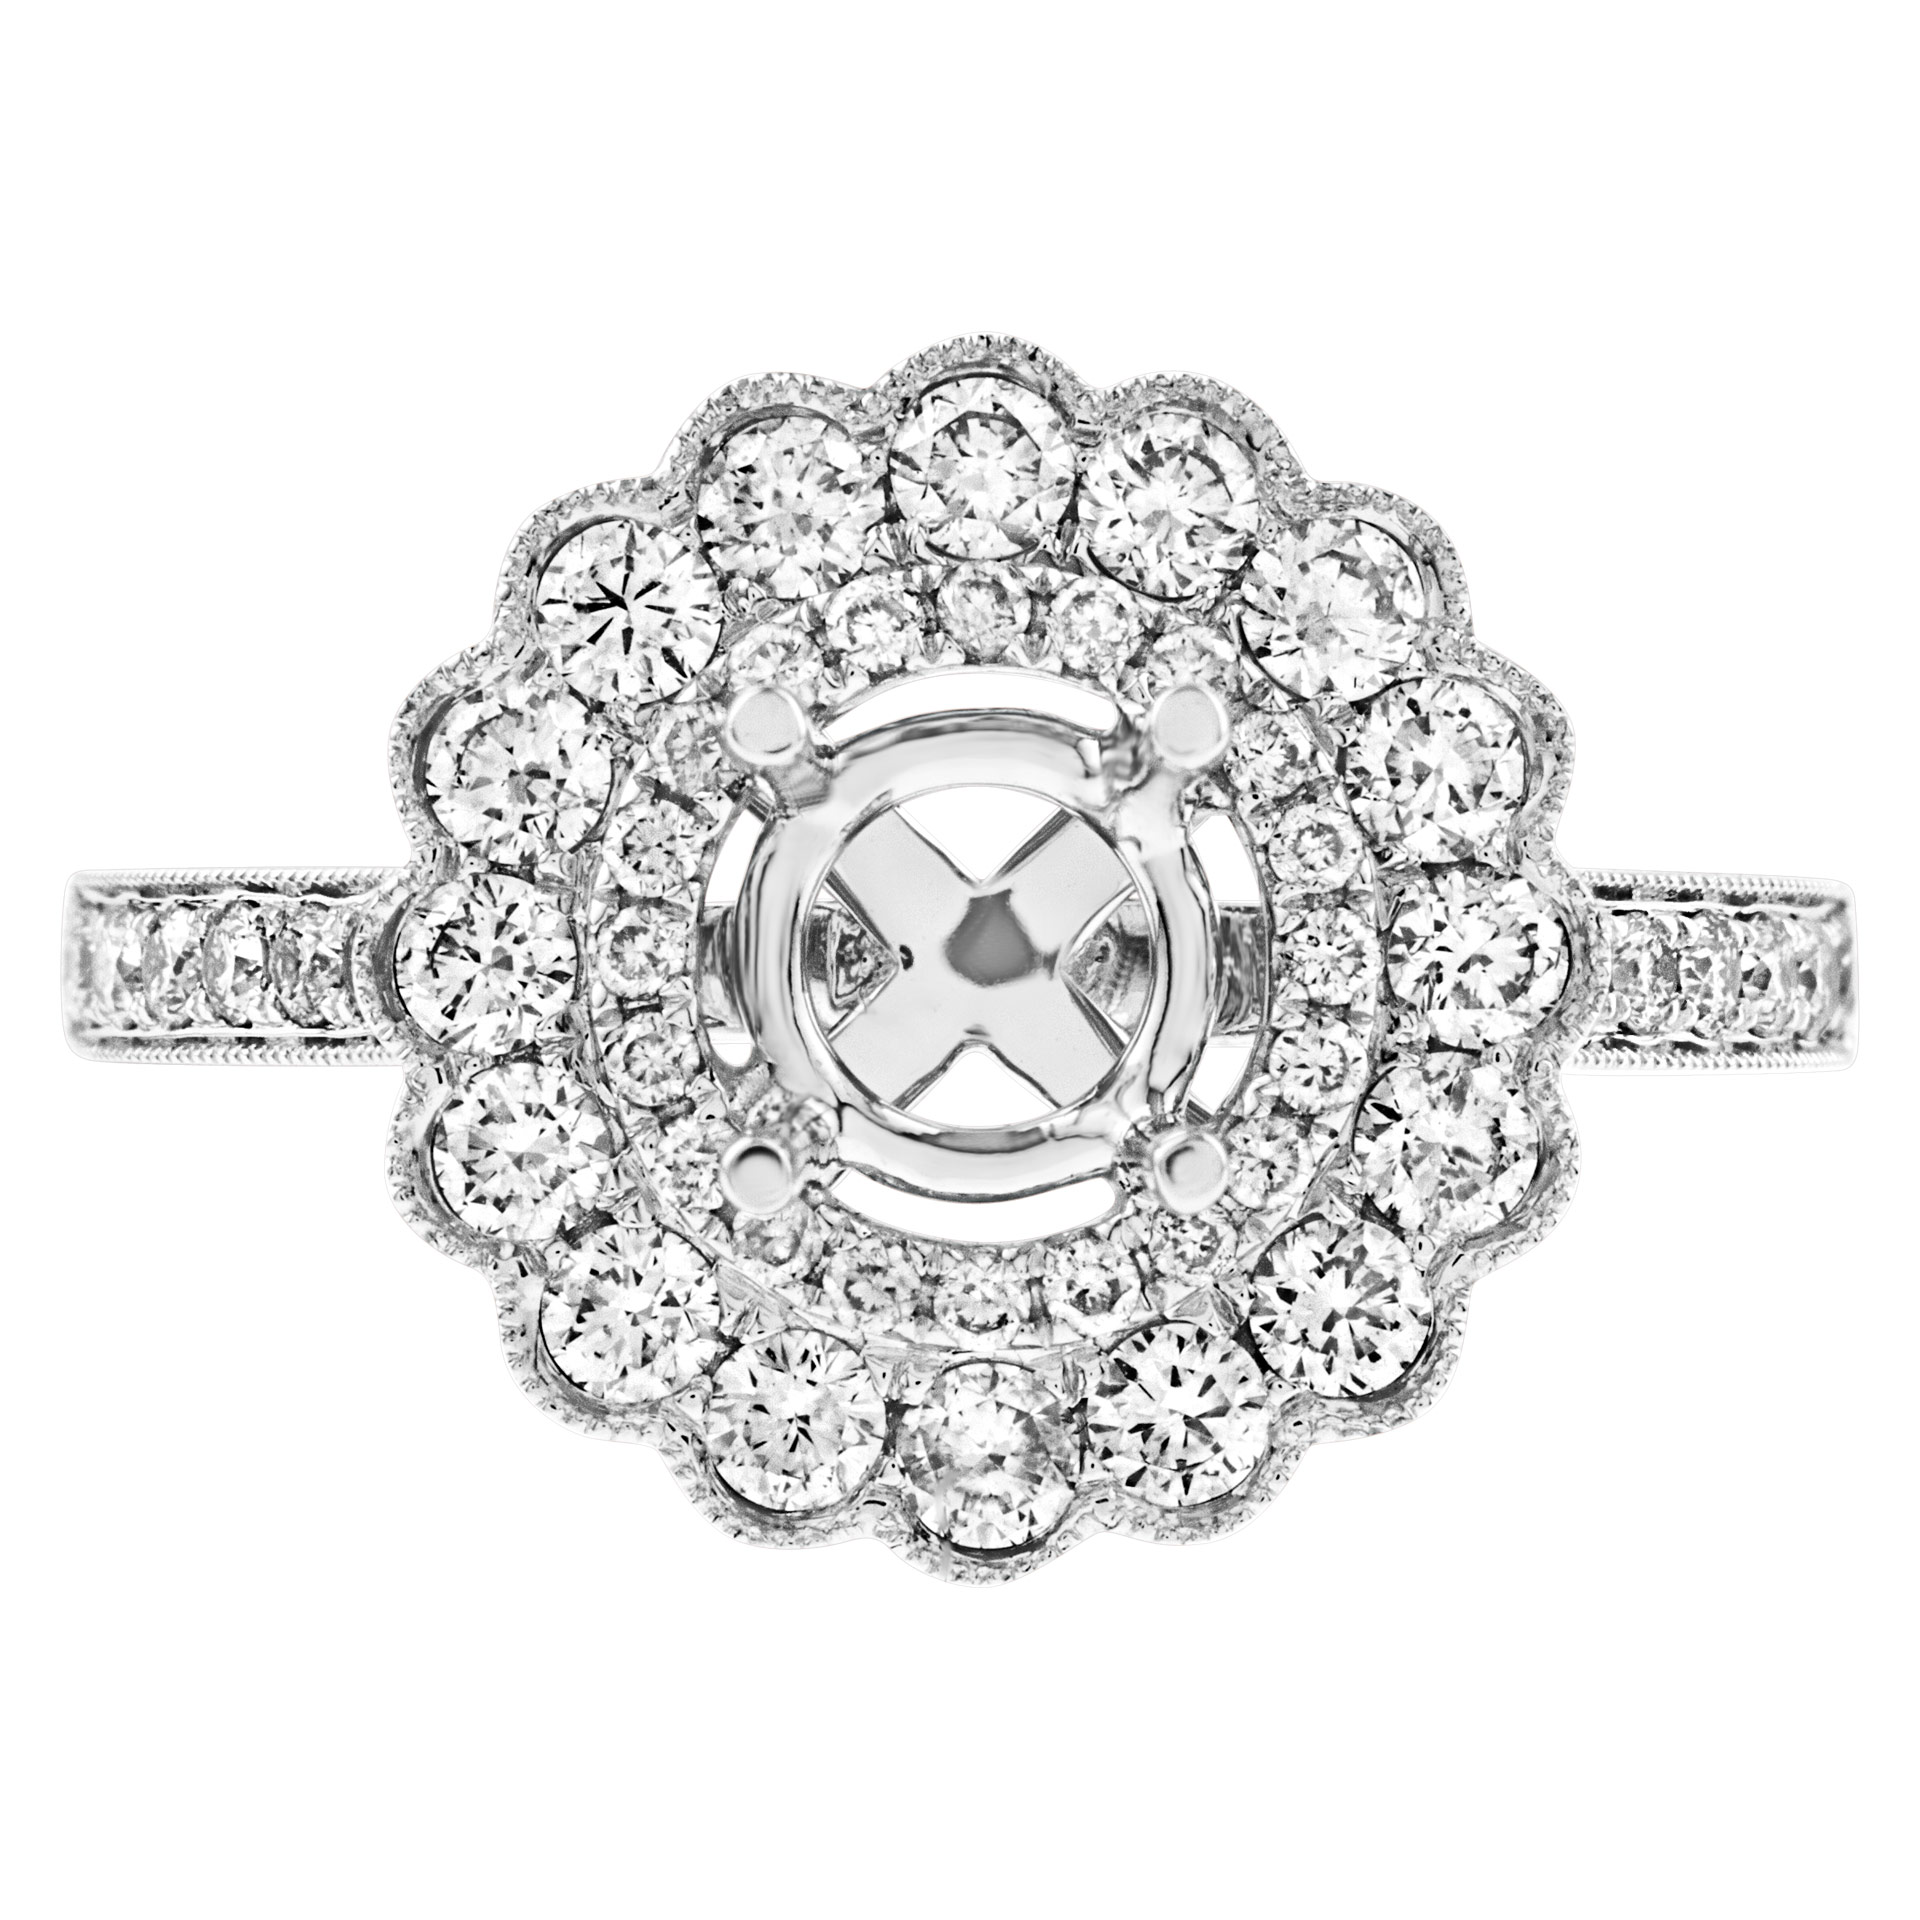 Floral Setting in 18K white gold and diamonds image 1